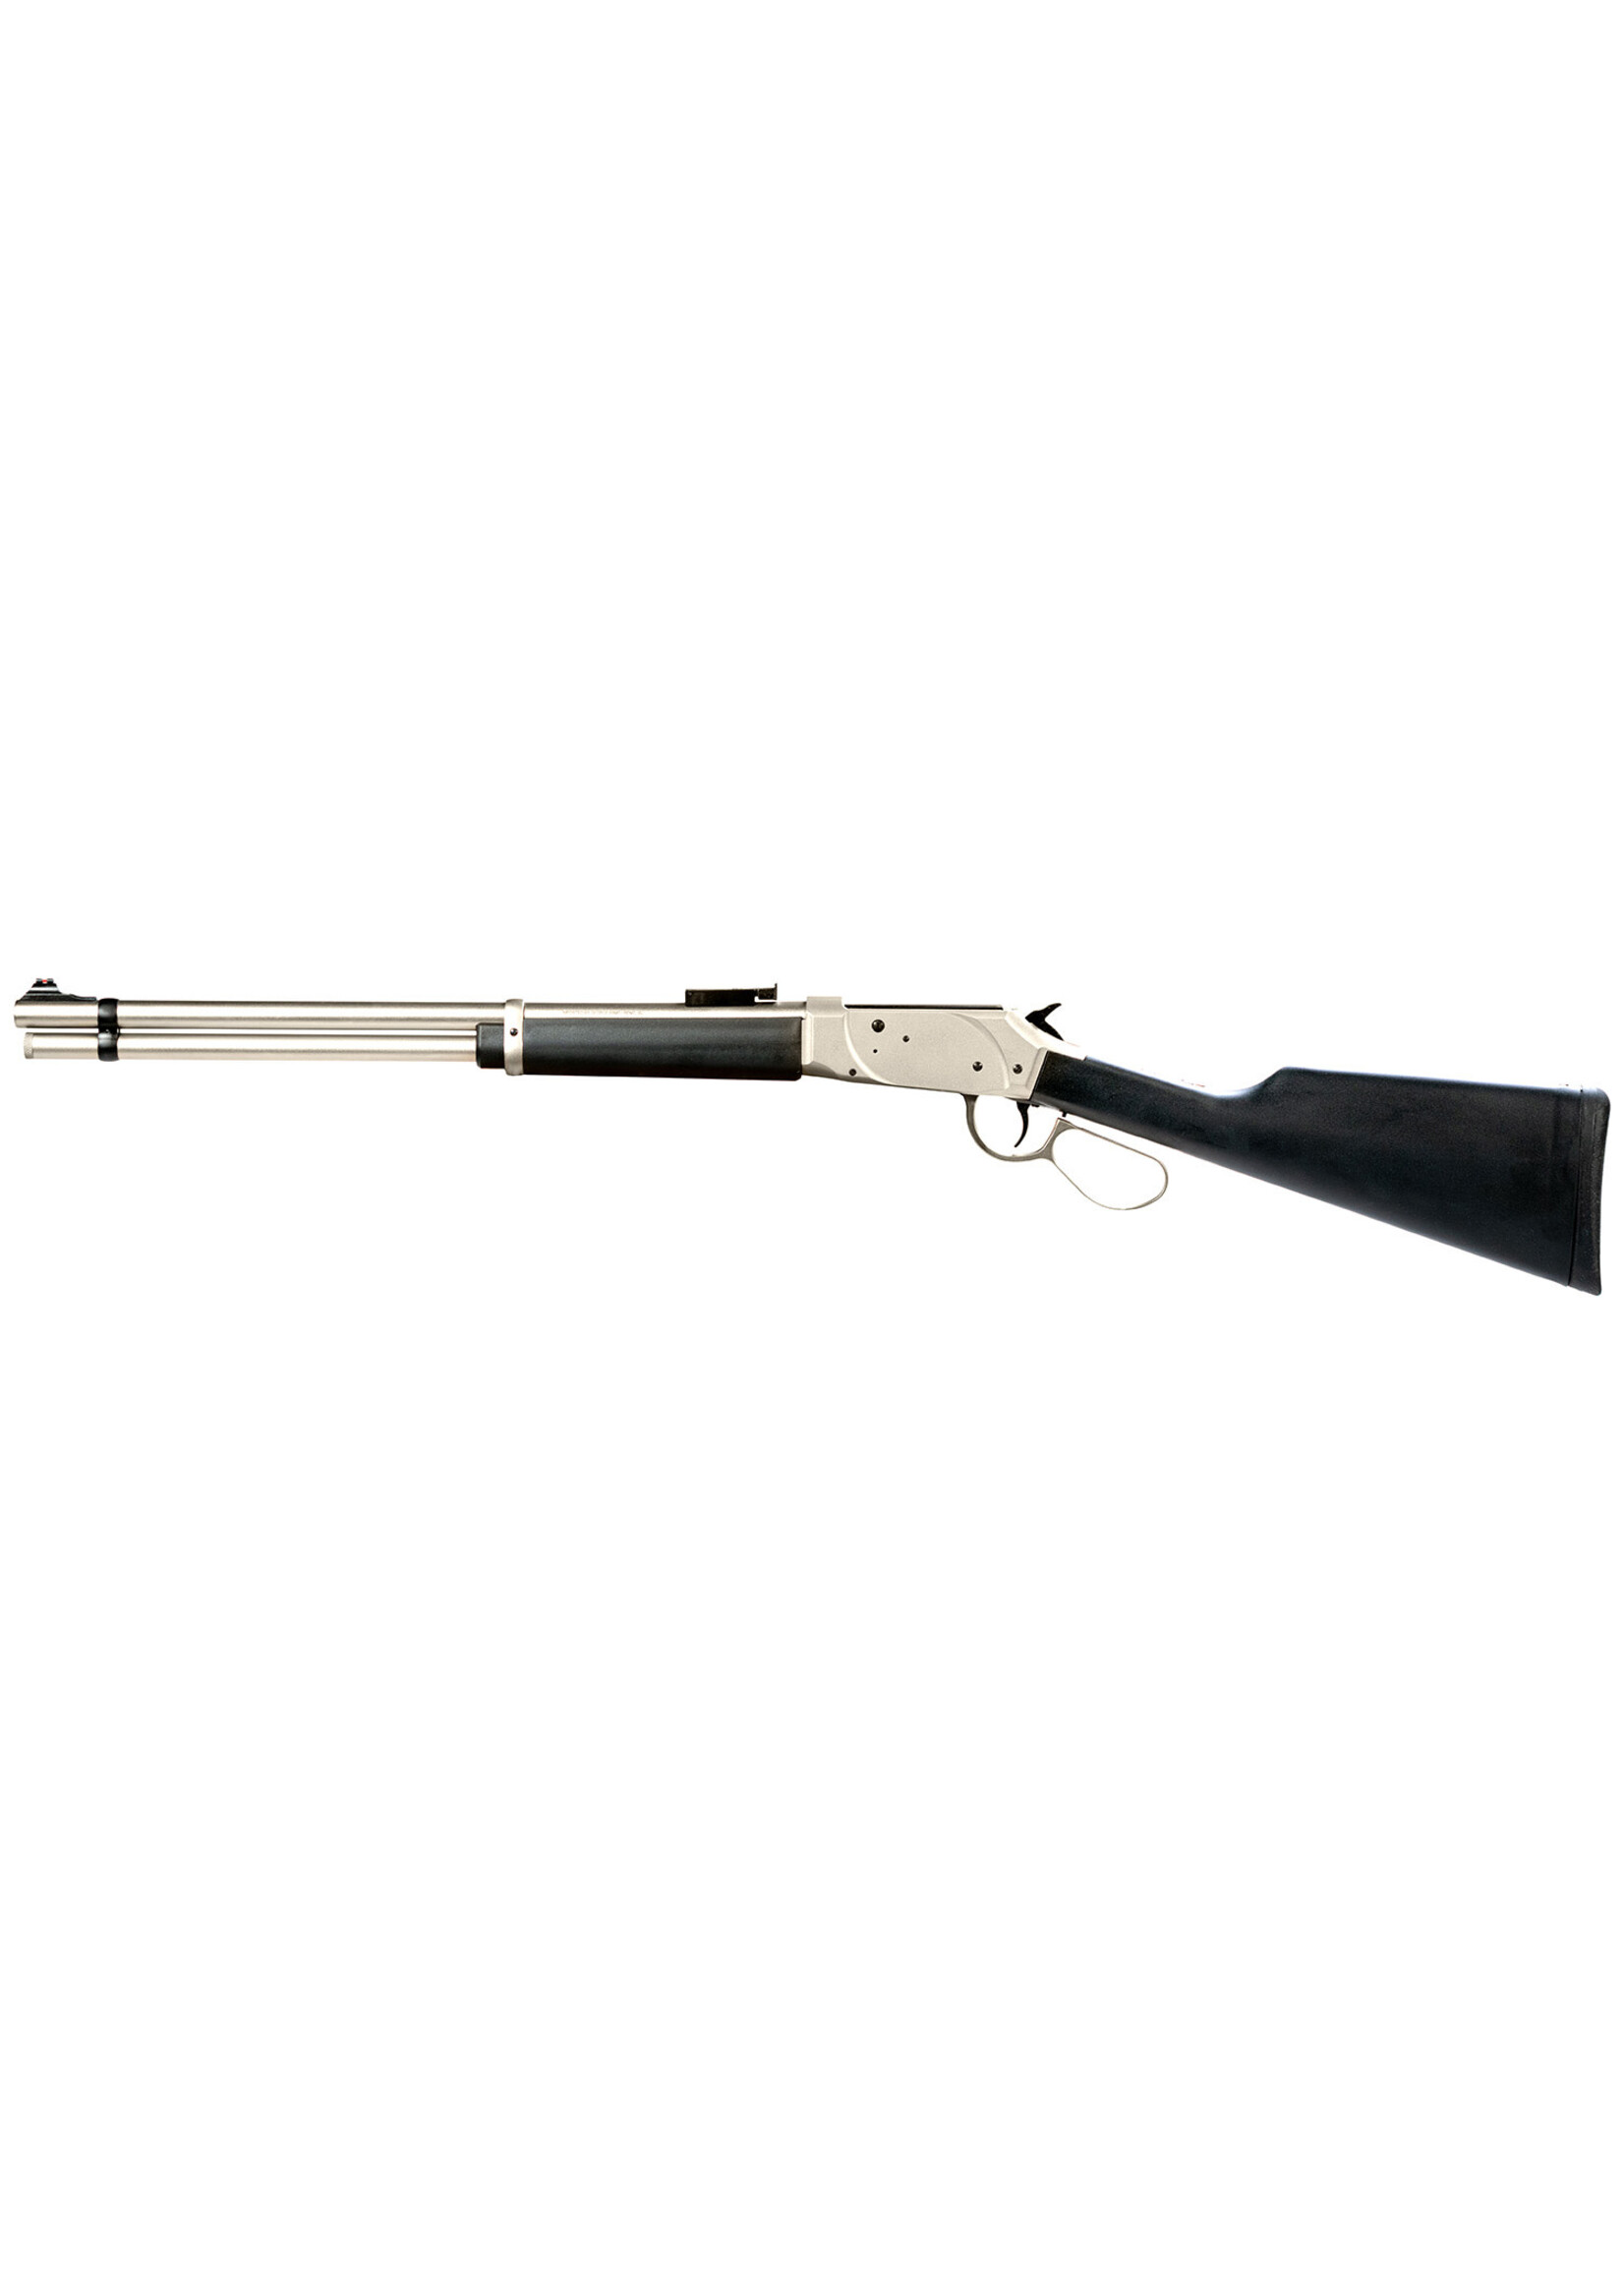 SPECIAL ORDER Gforce Arms GFLVR24SS Huckleberry 410 Gauge Lever 2.5" Chamber 9+1 24", Stainless Barrel/Rec, Black Synthetic Furniture, HiViz Sights, 3 Chokes